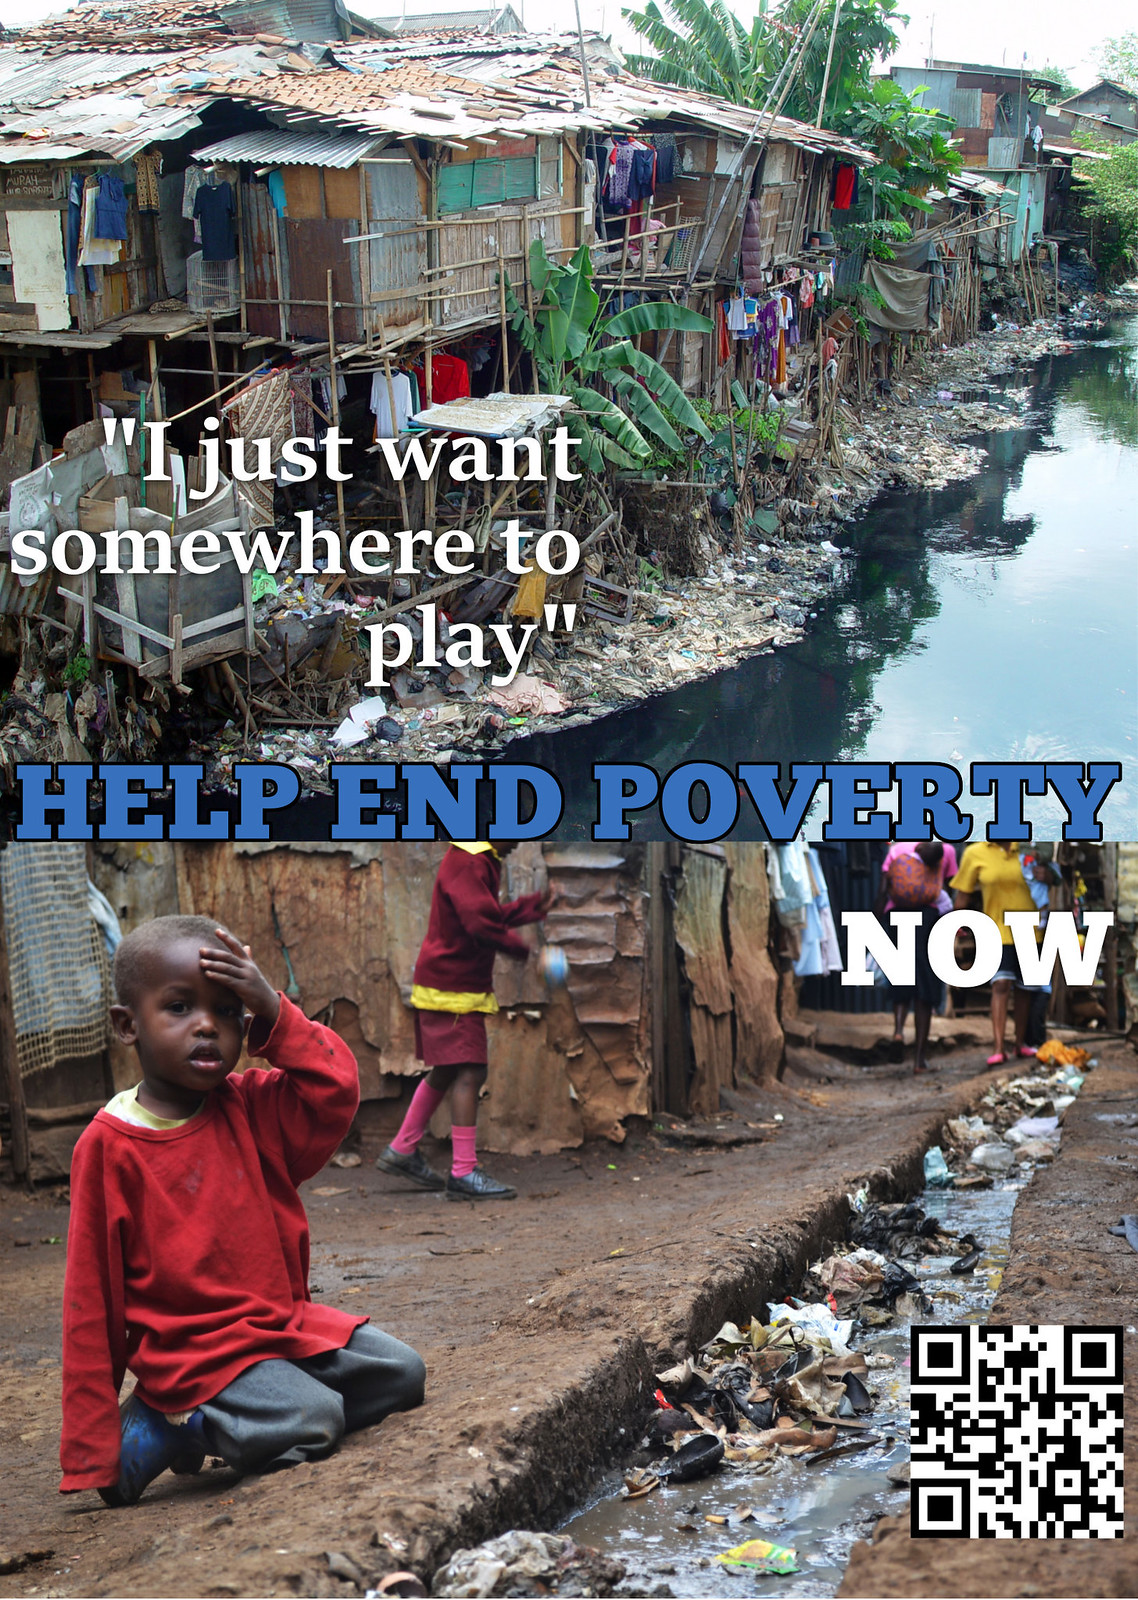 Create a rhetorical poster exercise: Help End Poverty. Now